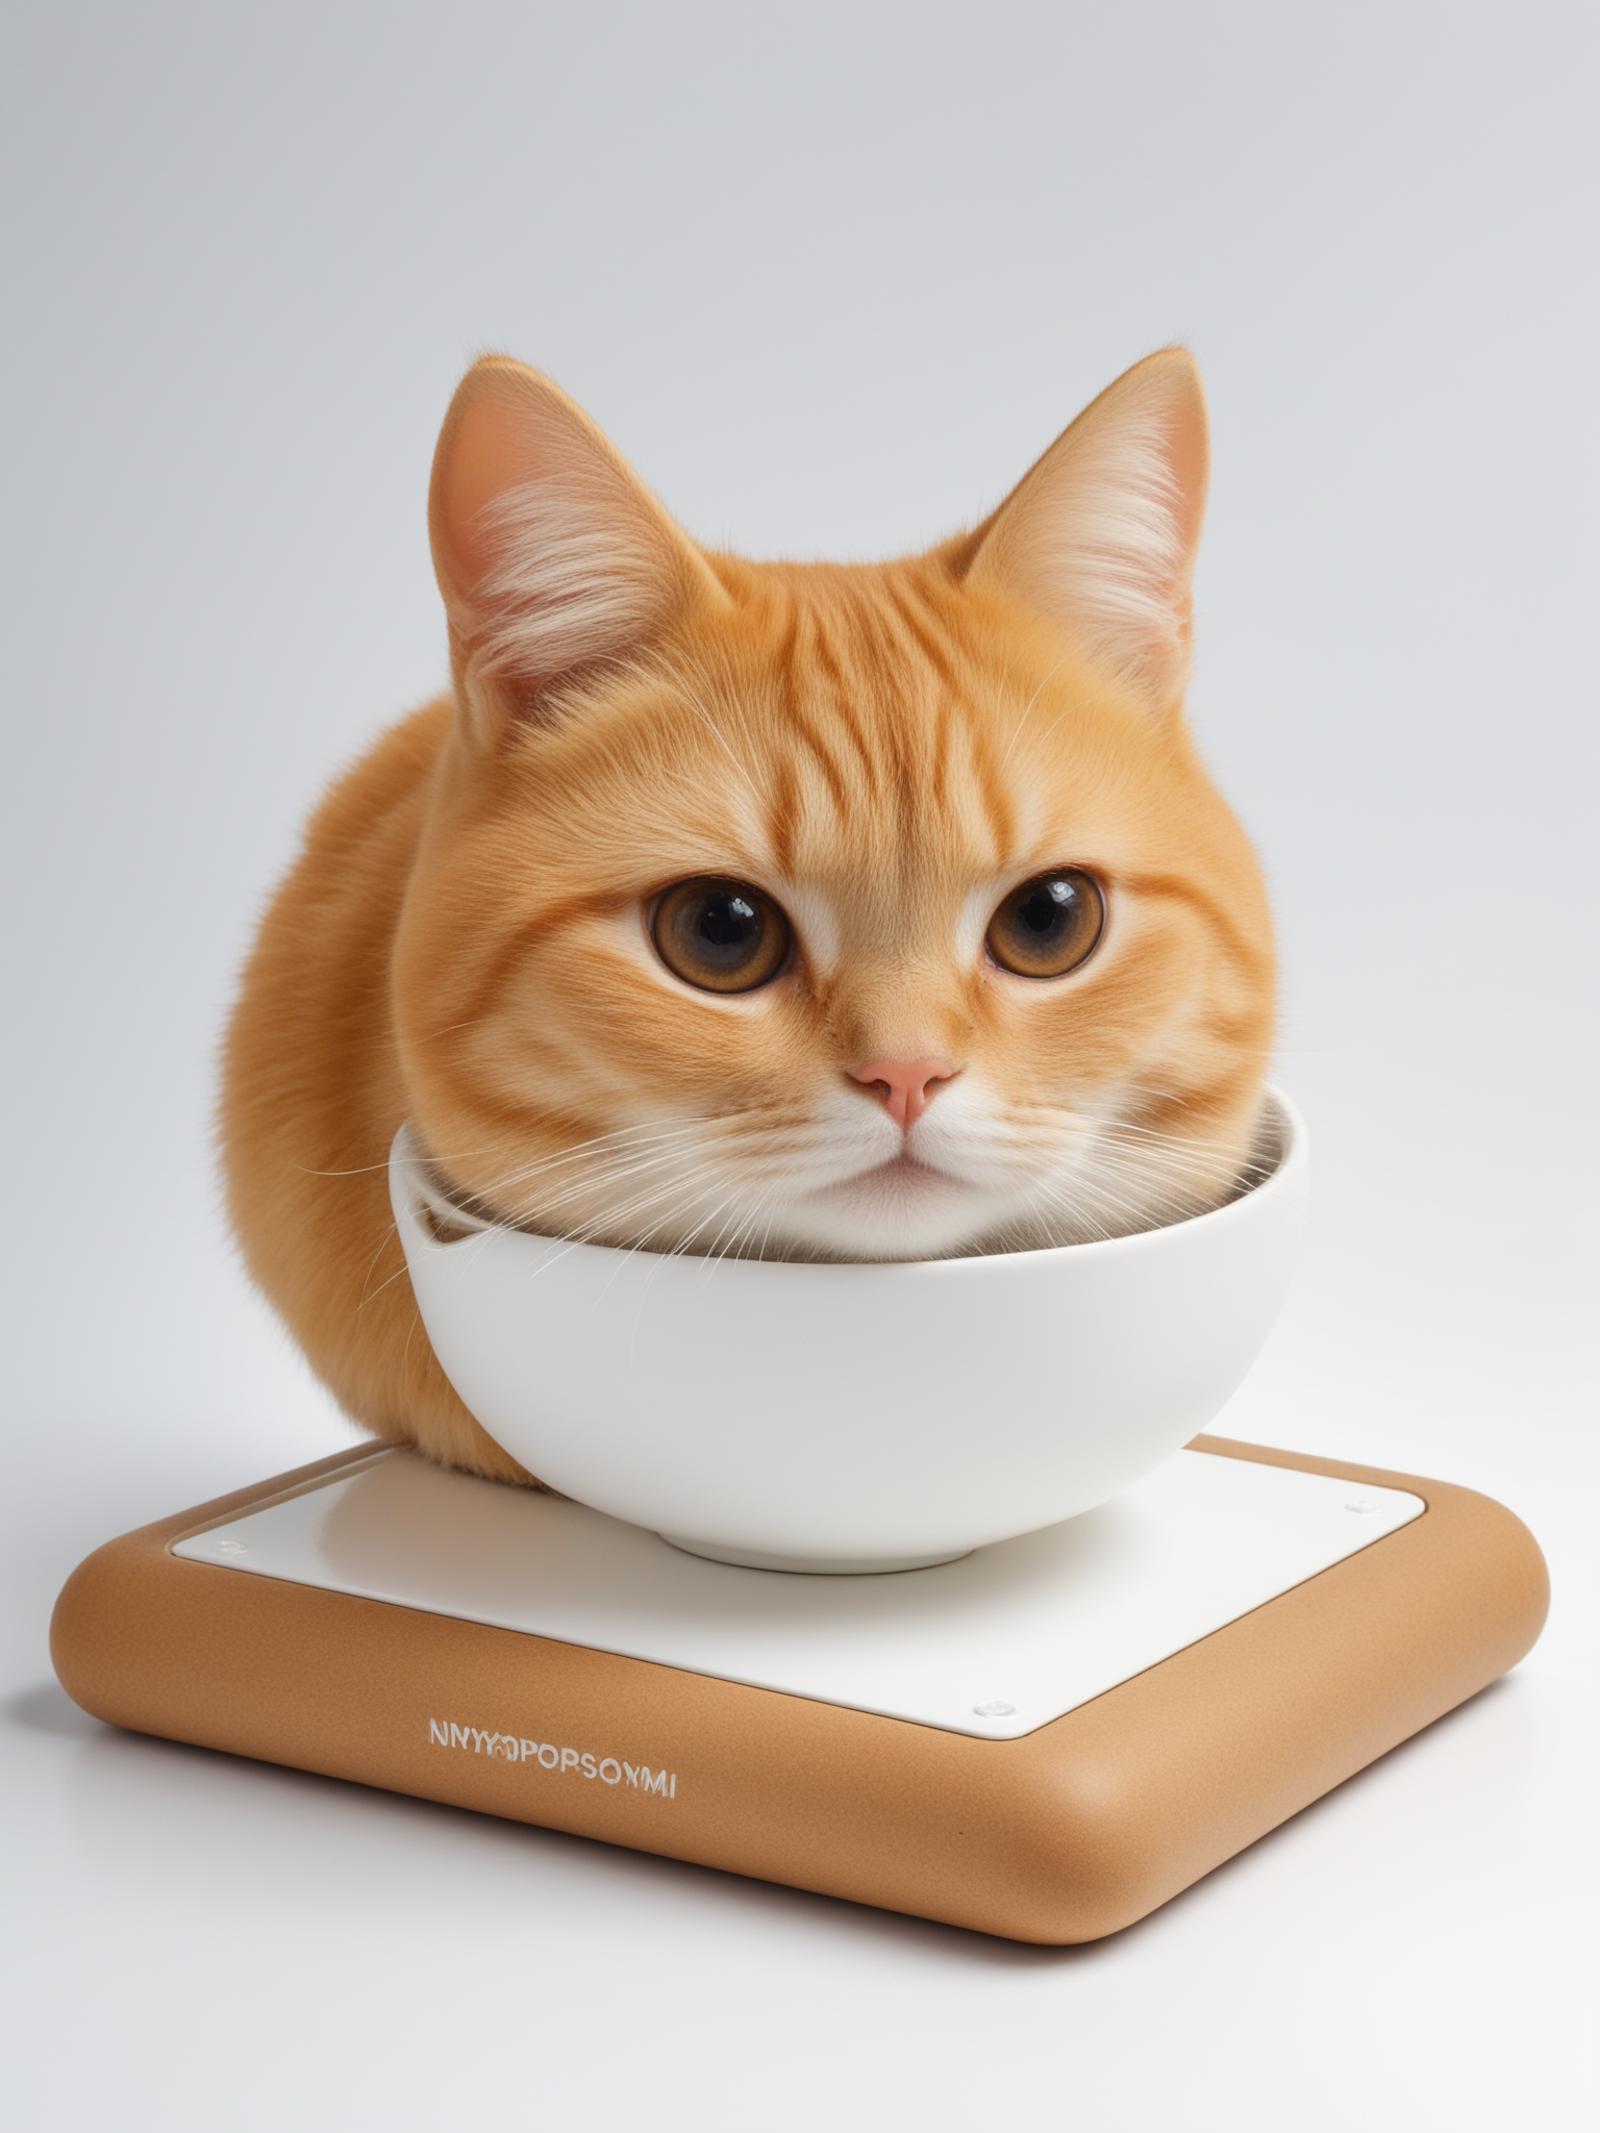 A tan cat sitting in a white bowl on a scale.